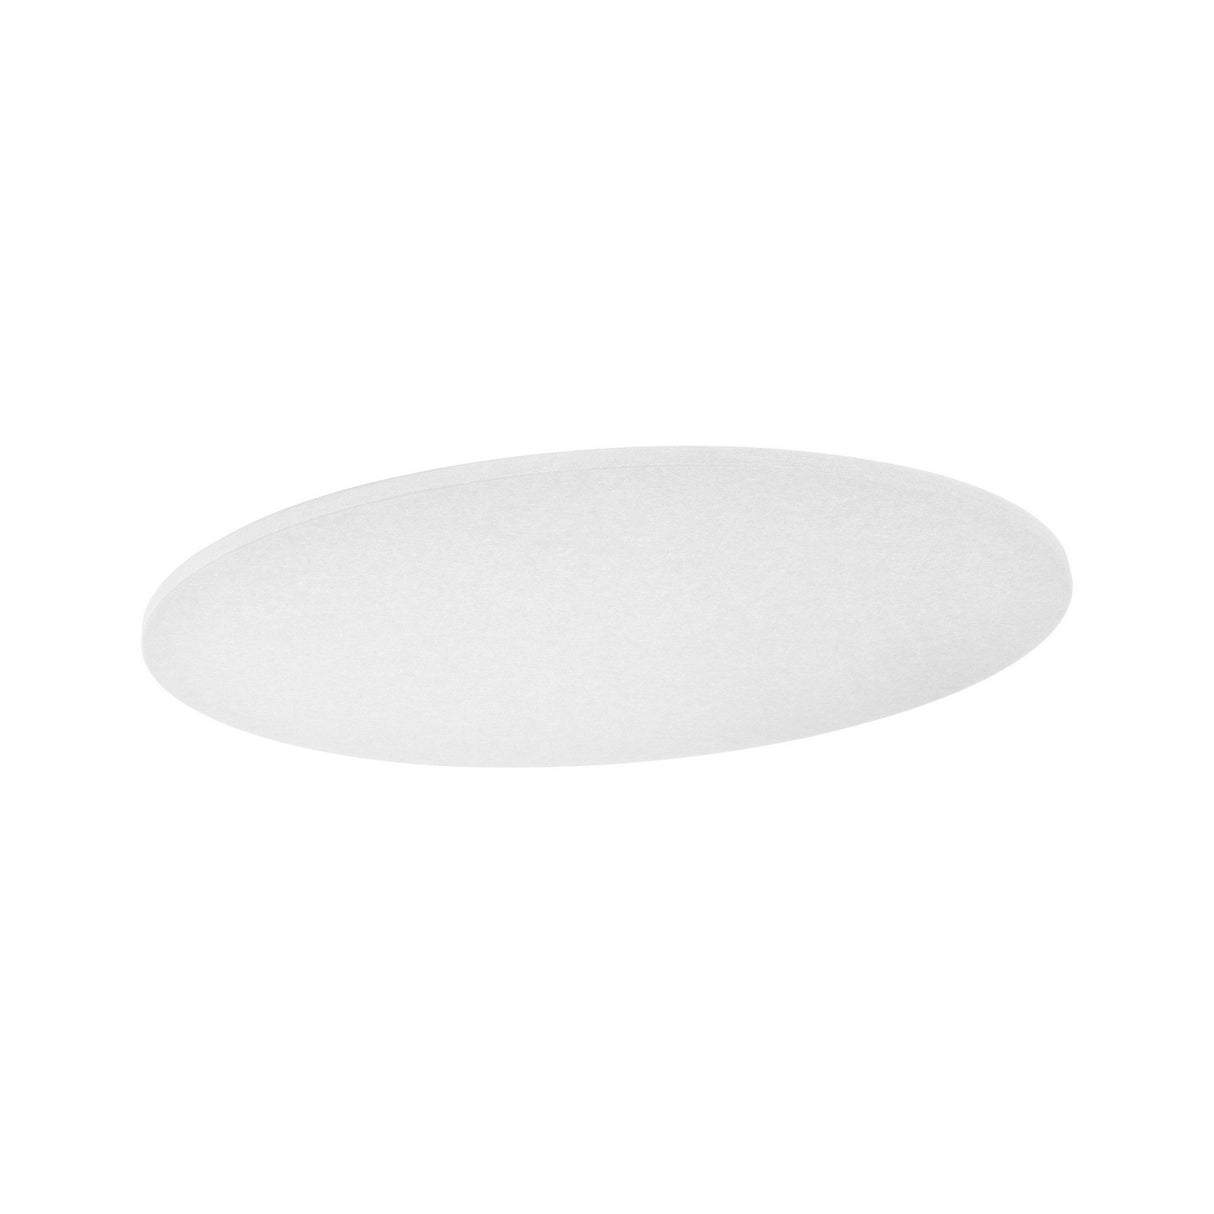 Primacoustic EcoScapes Round Cloud 4-Foot Micro-Beveled Edge Wall Panel, Glacier 2-Pack